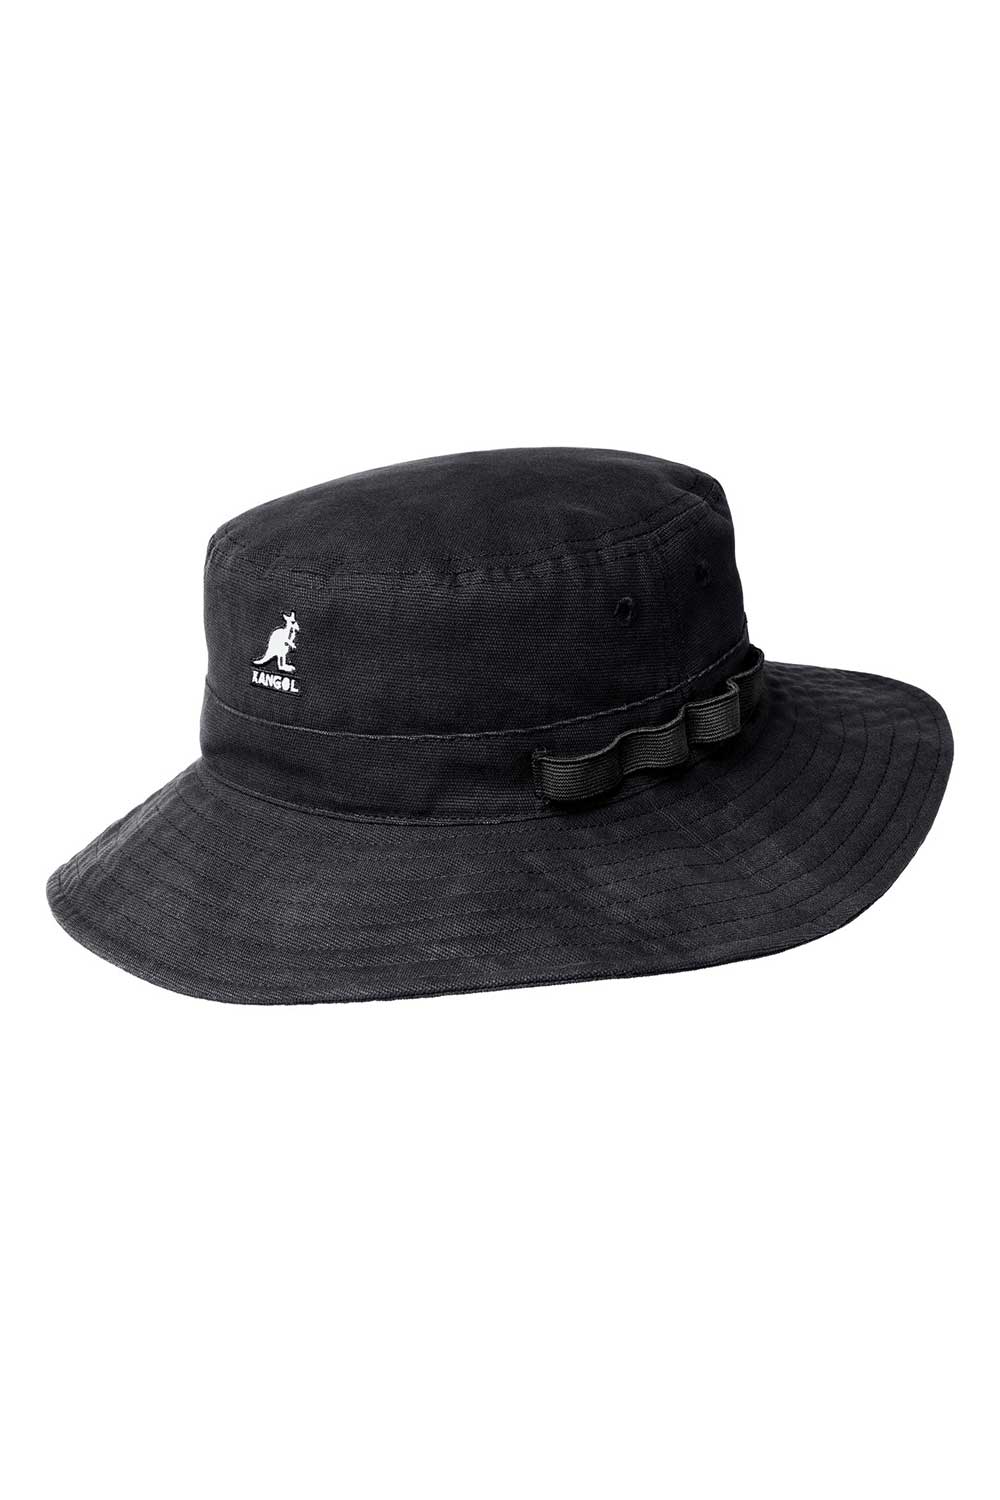 Buy the Kangol Utility Cords Jungle Hat Coal at Intro. Spend £50 for free UK delivery. Official stockists. We ship worldwide.